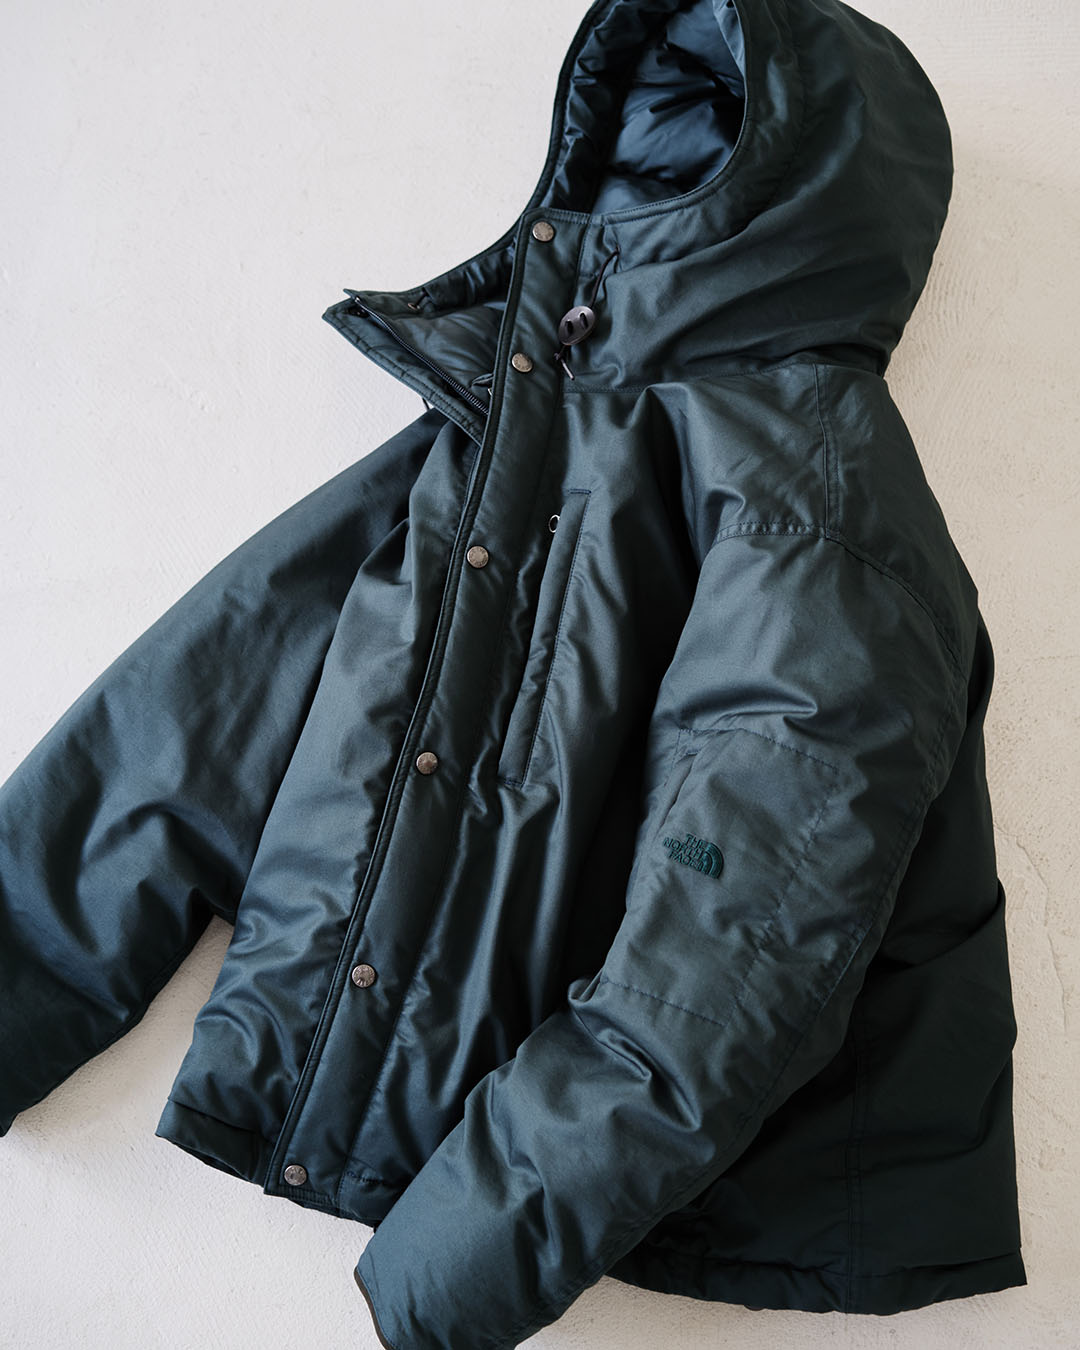 nanamica / THE NORTH FACE PURPLE LABEL / Featured Product vol.39